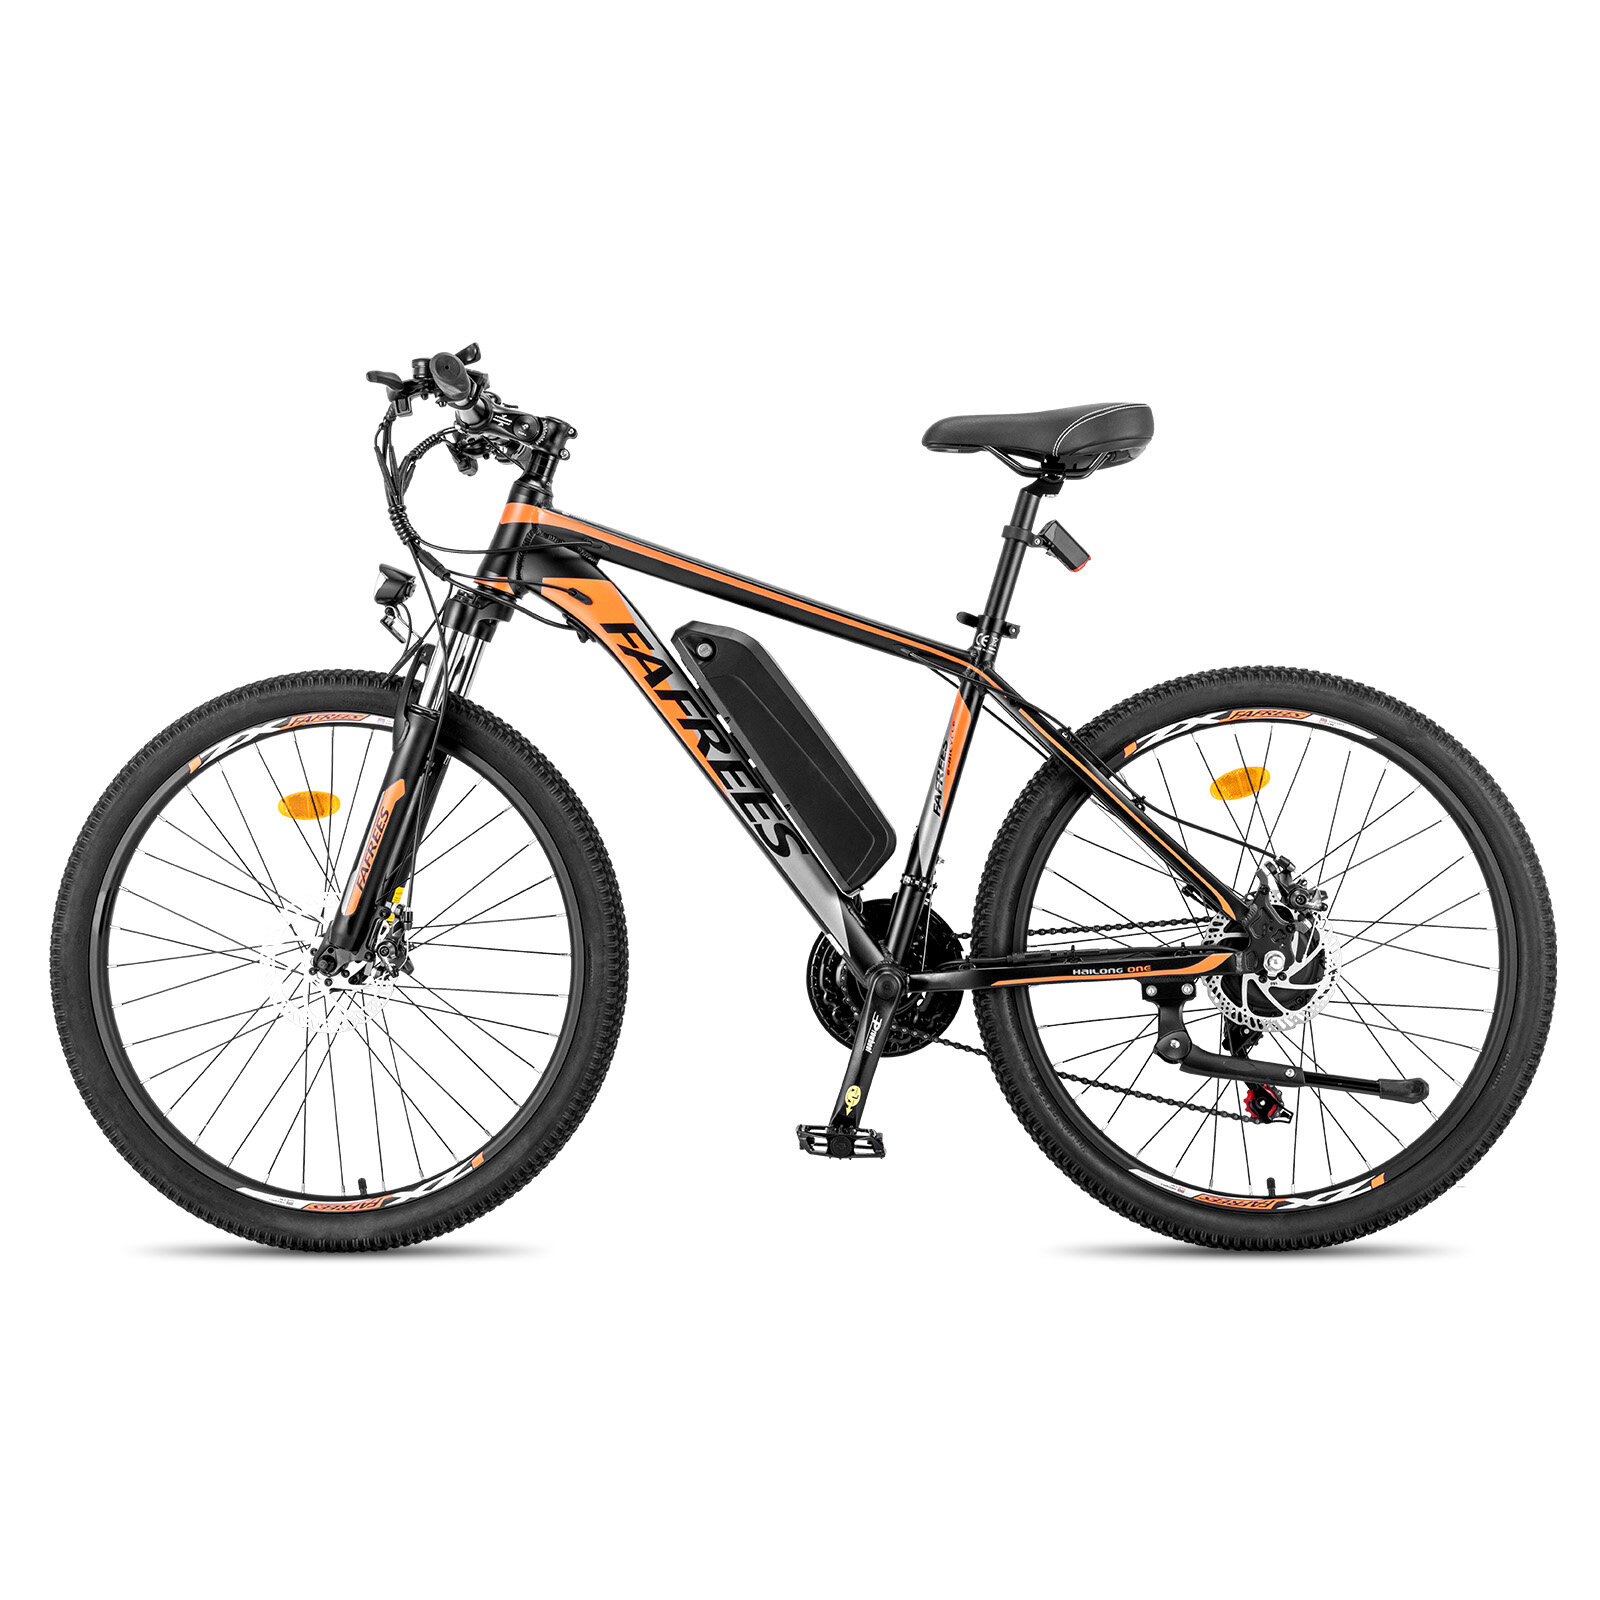 best price,fafrees,hailong,one,36v,13ah,250w,26inch,electric,bicycle,eu,discount